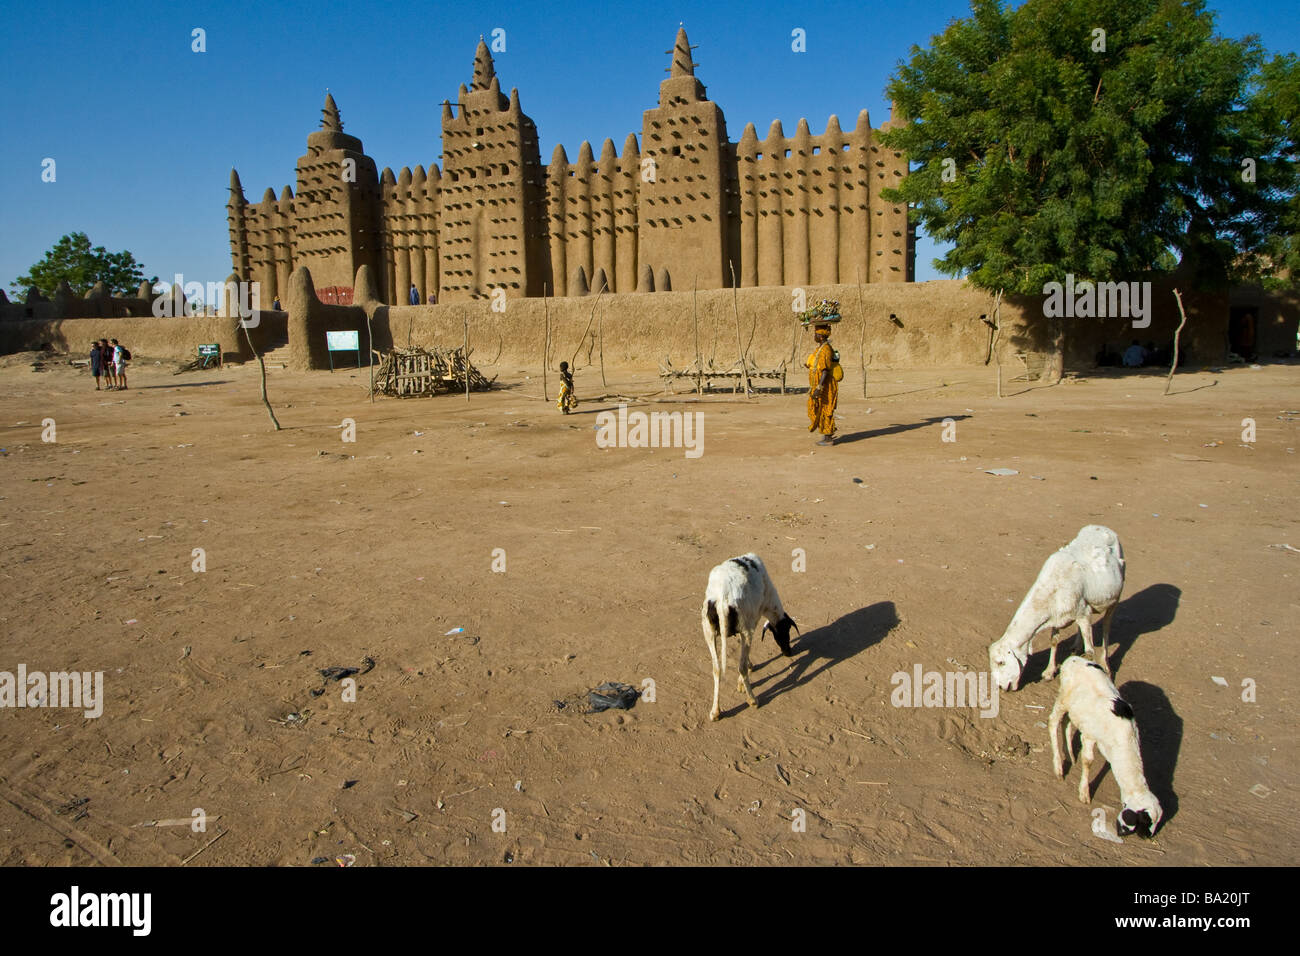 Great Mosque in Djenne Mali Stock Photo